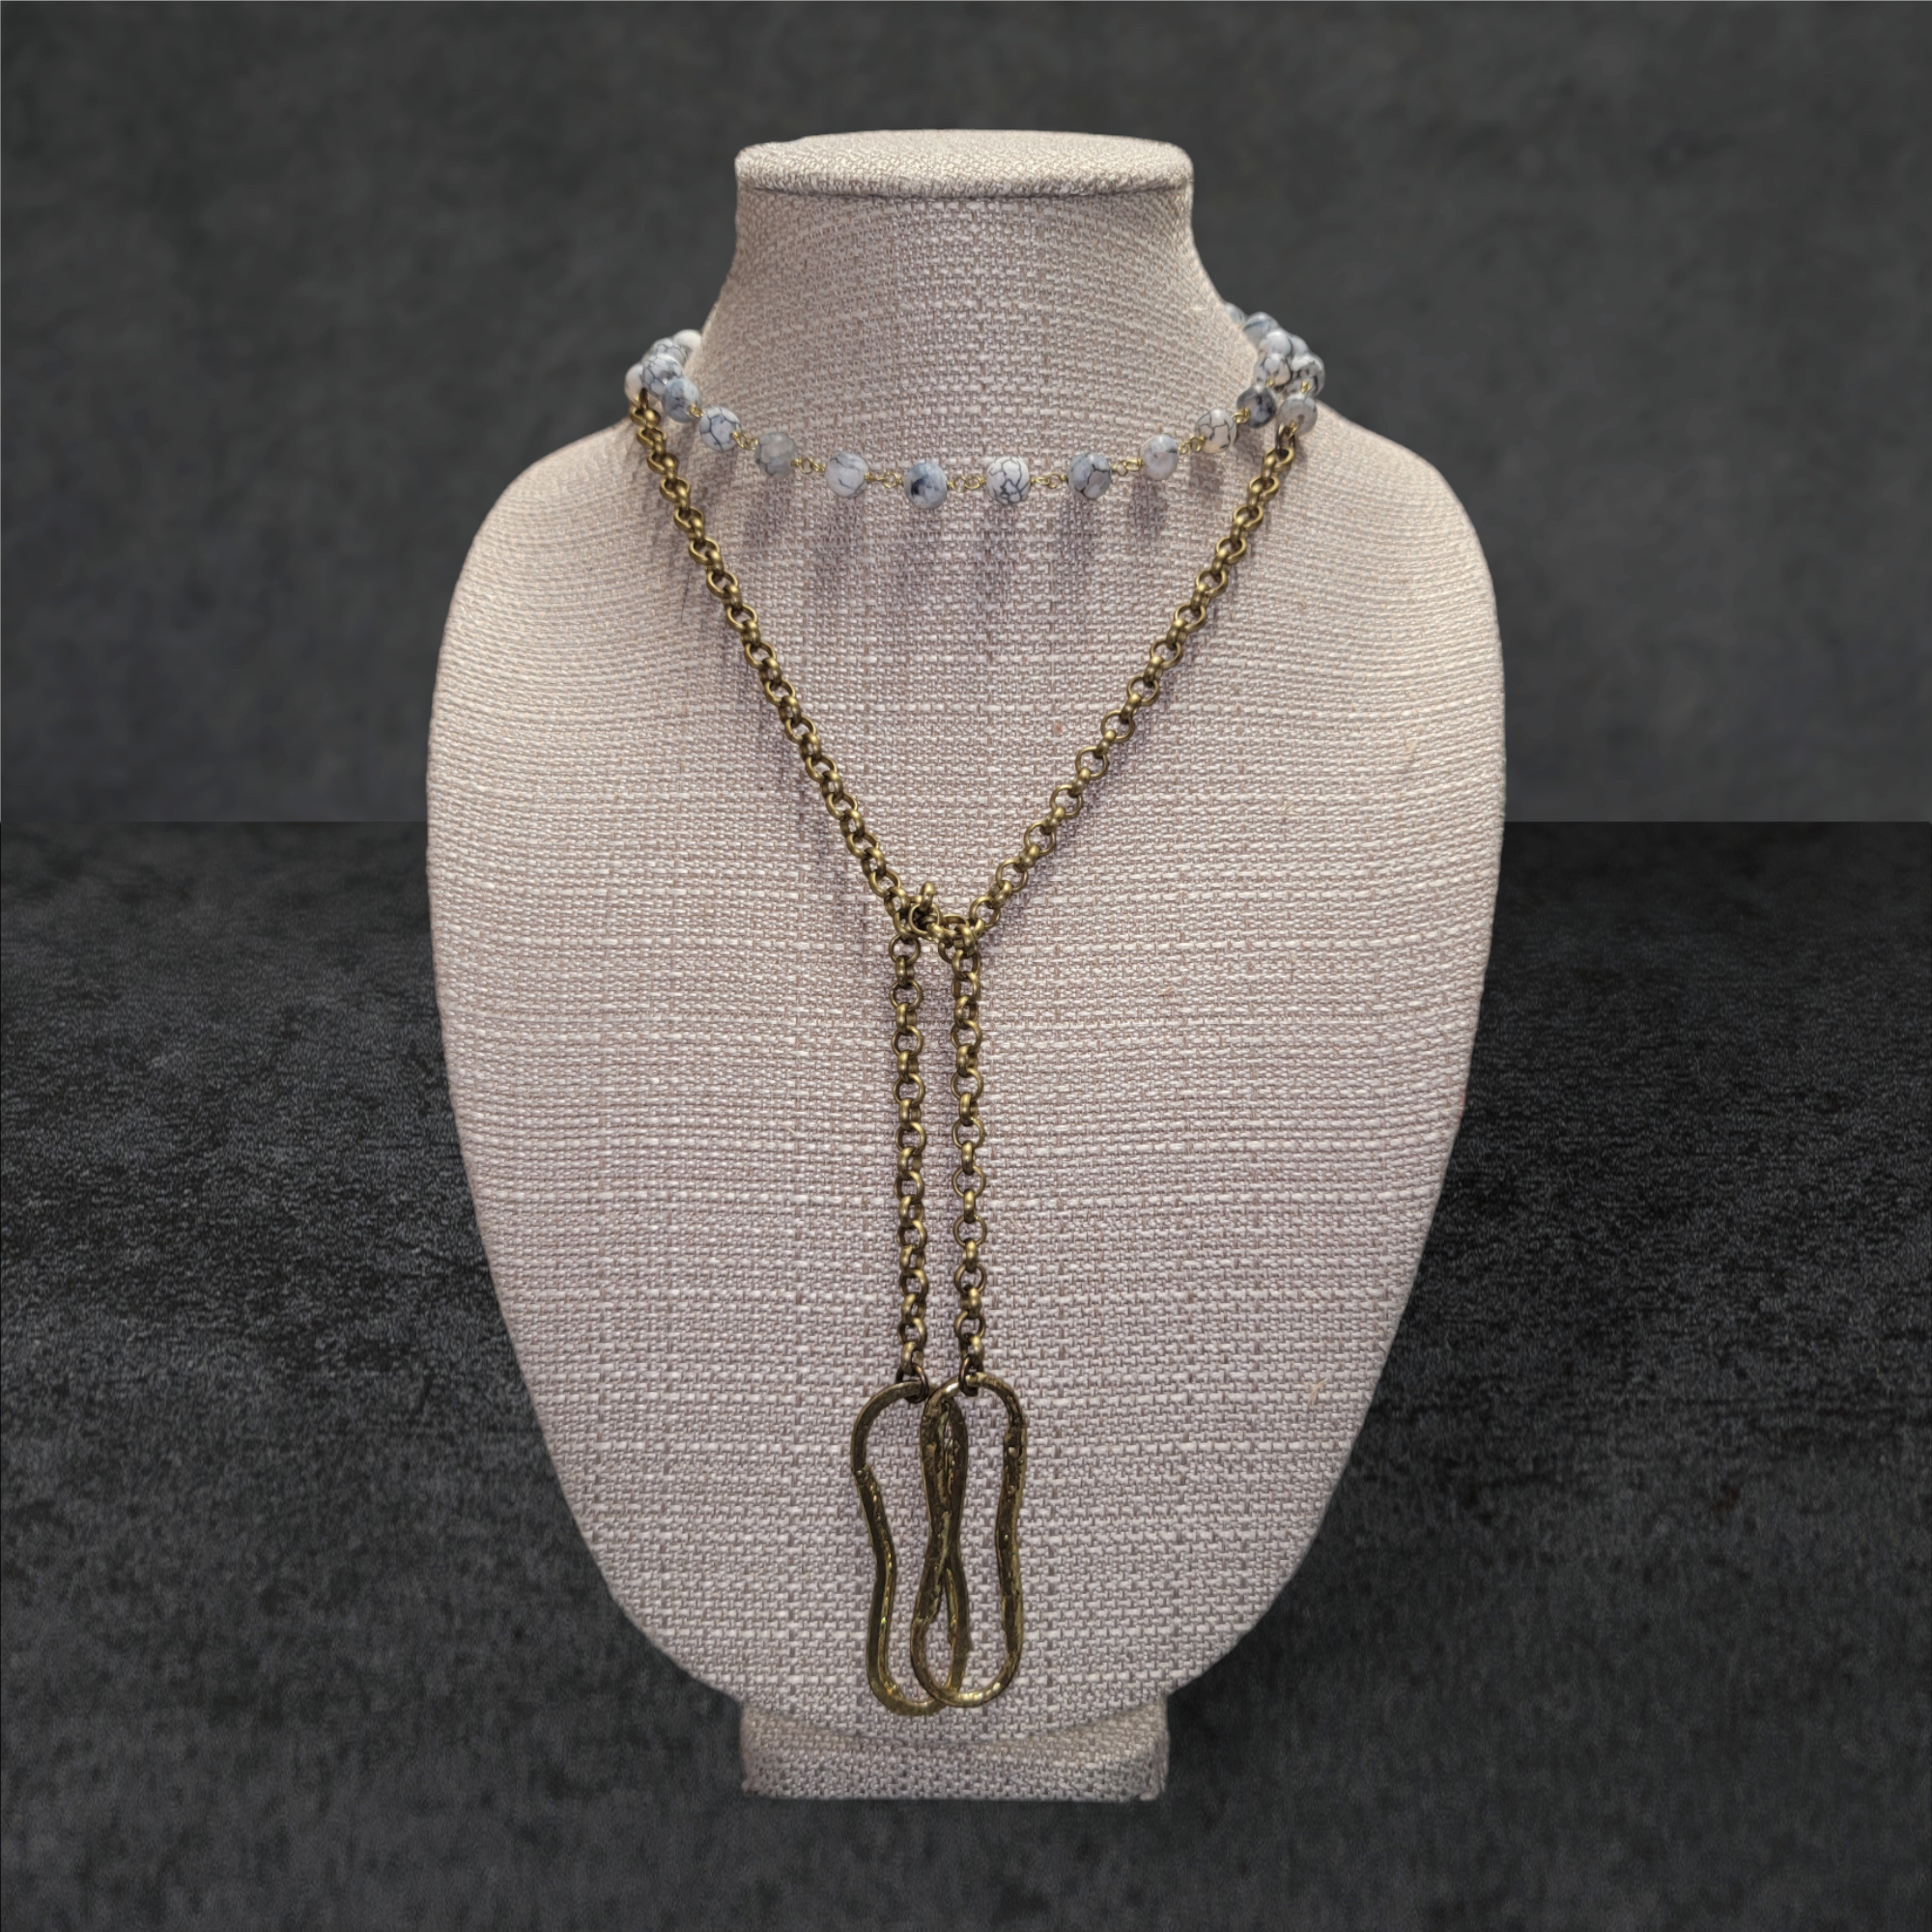 Blue & White Matte Jasper Laureate with Antique Bronze Chain and Connector